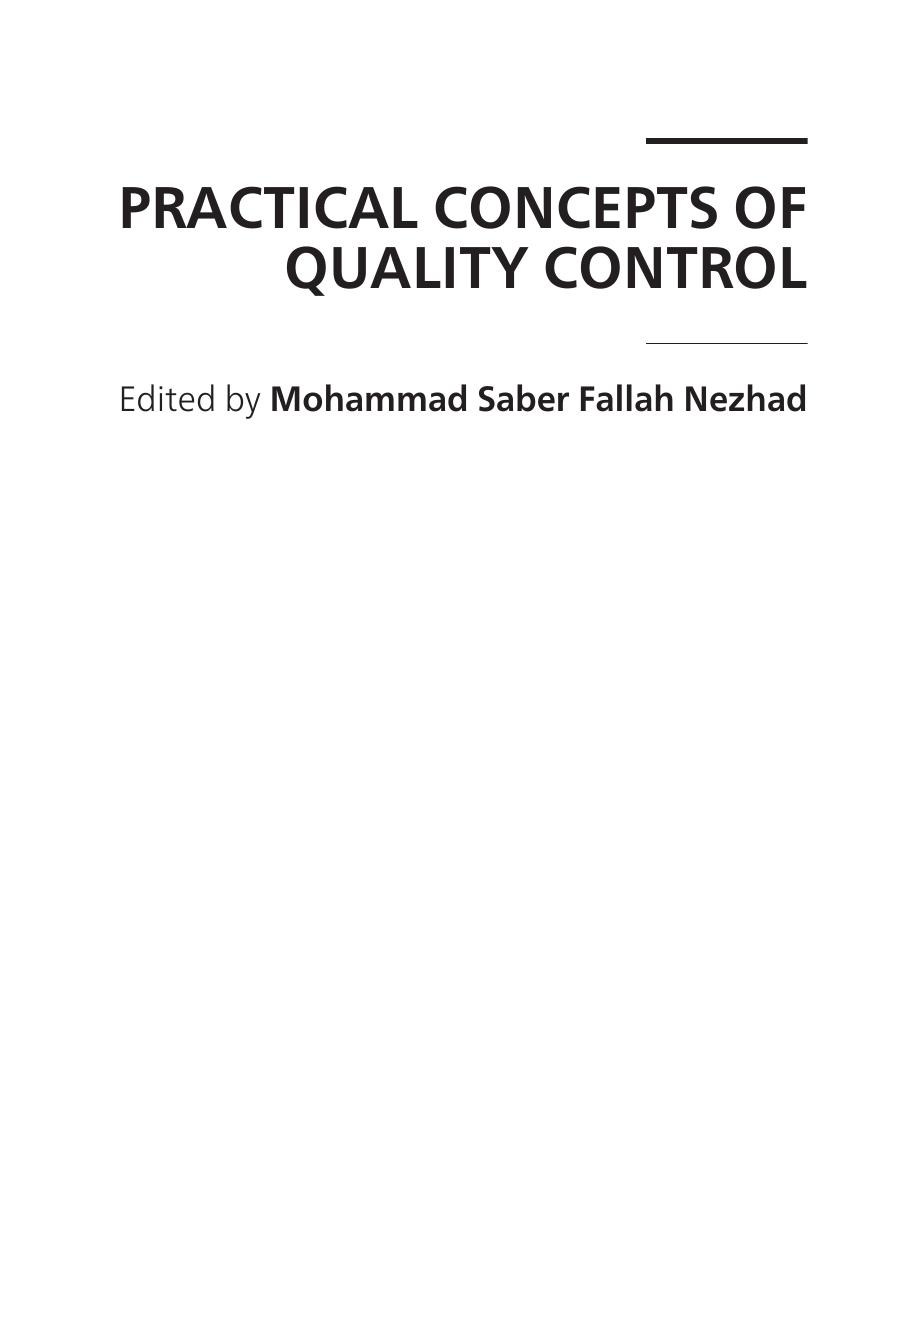 Practical Concepts of Quality Control 2012.pdf